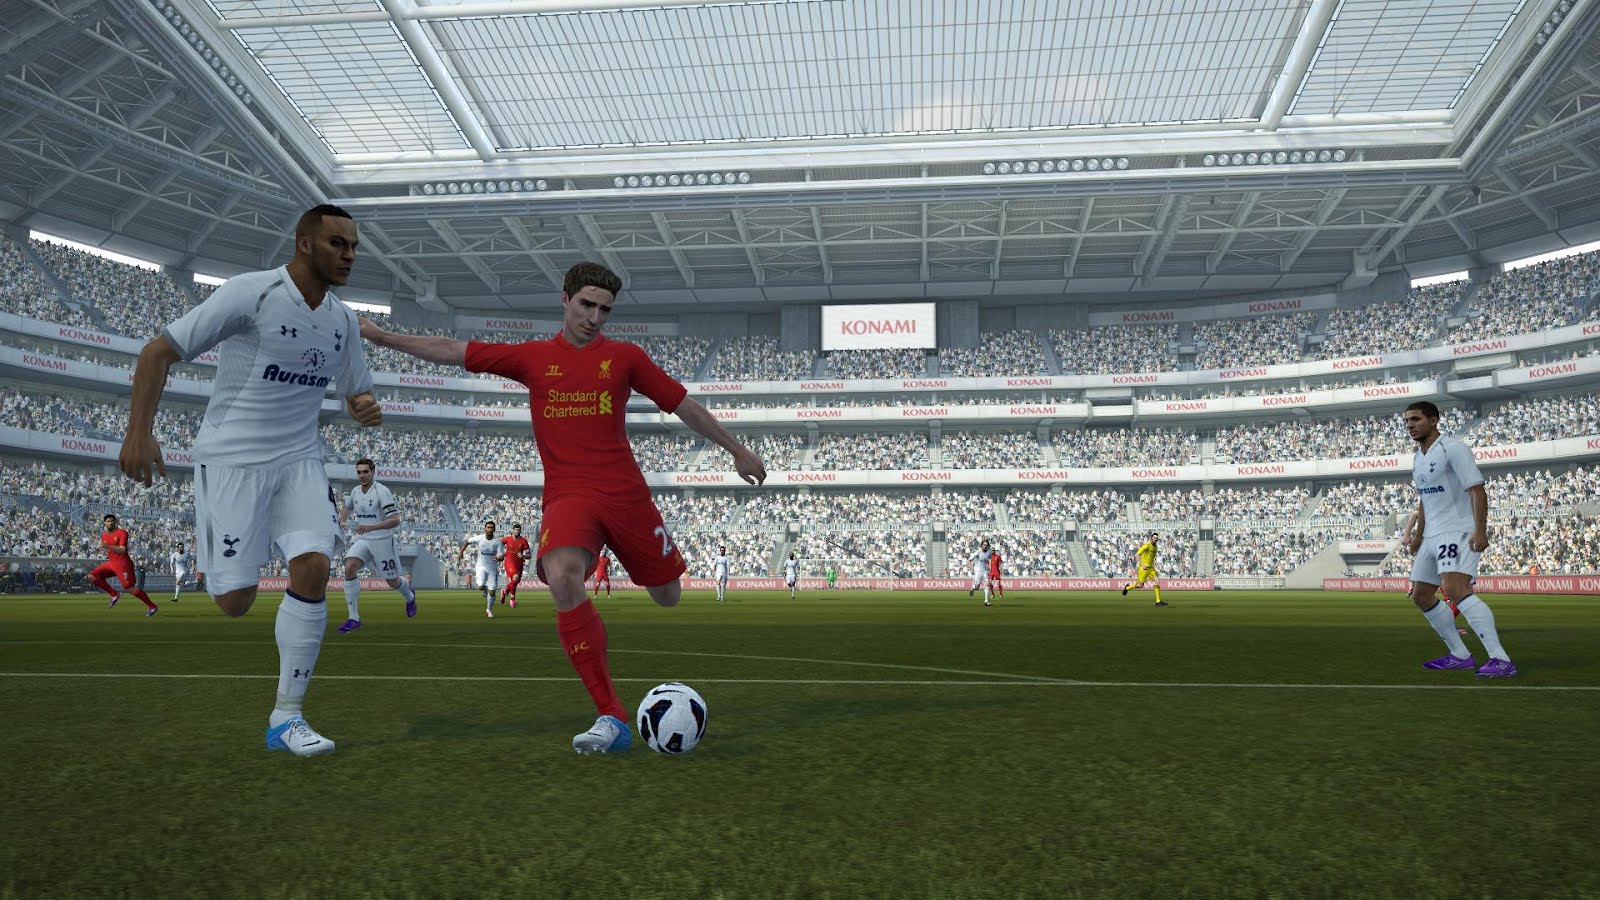 PES 2013 Demo #1 Released!!